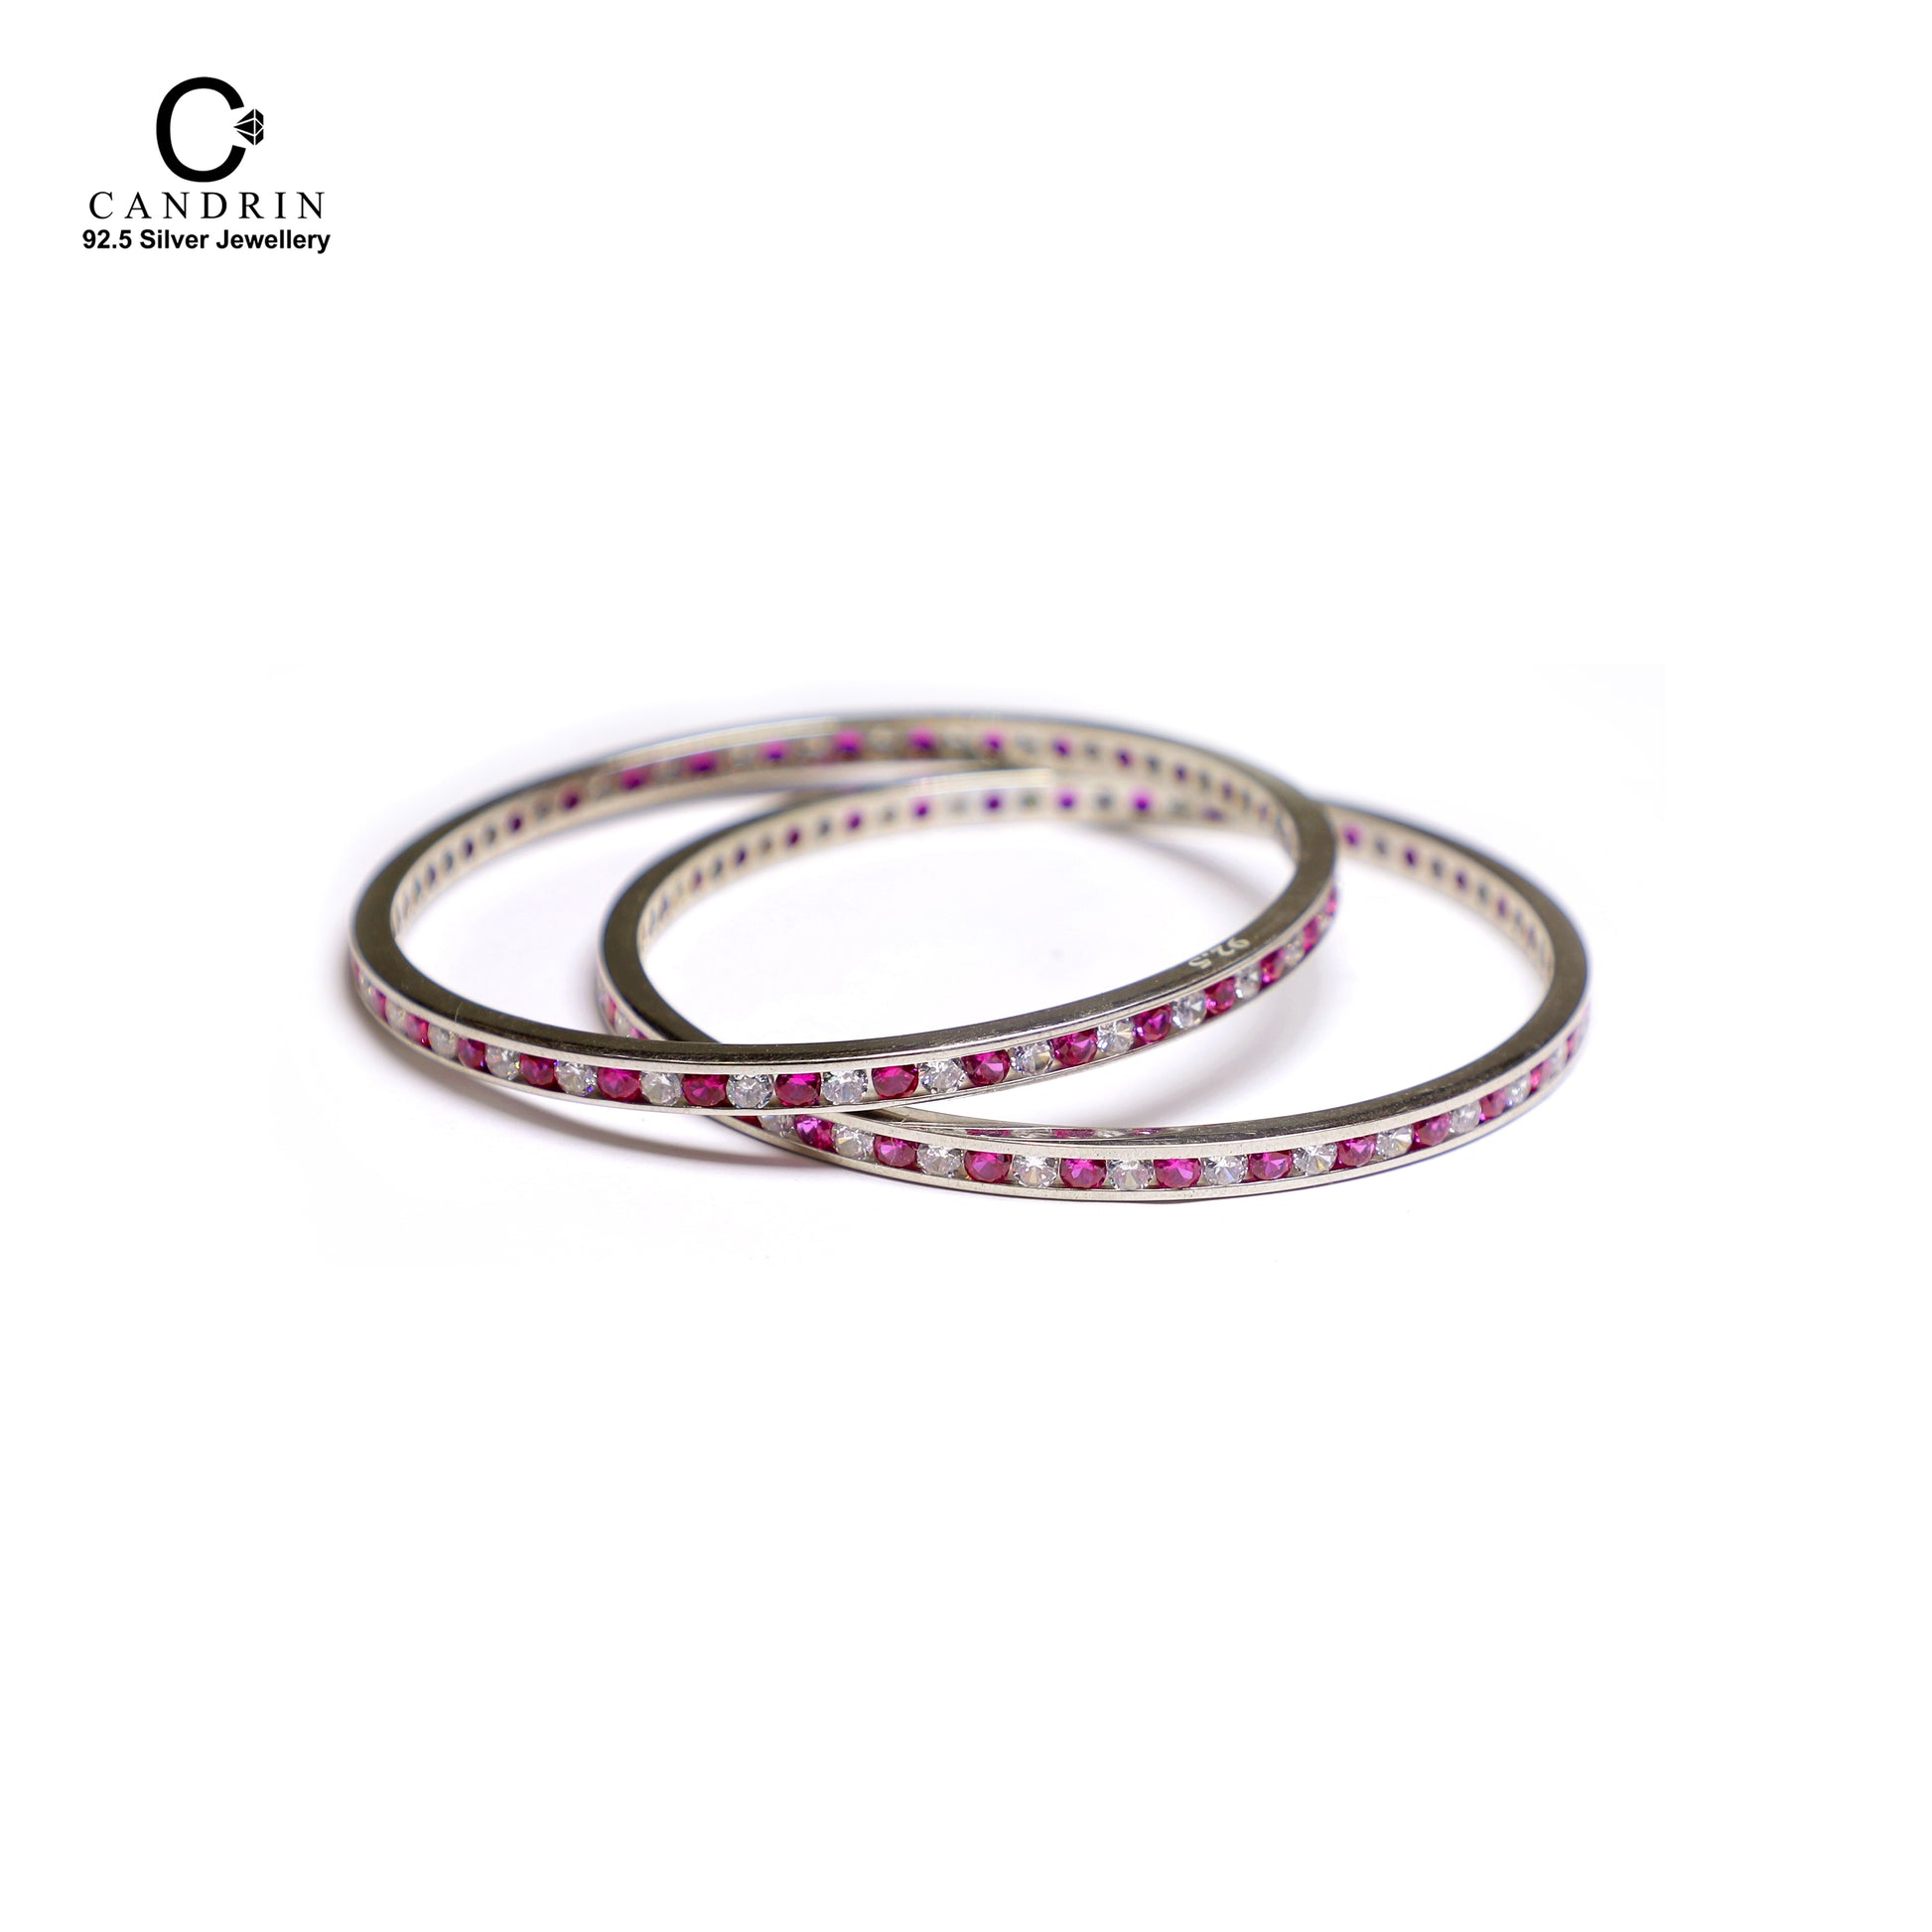 silver jewellery collection / Stainly bangles/ Stainly candrin bangles/ candrin bangles / candrin jewellery